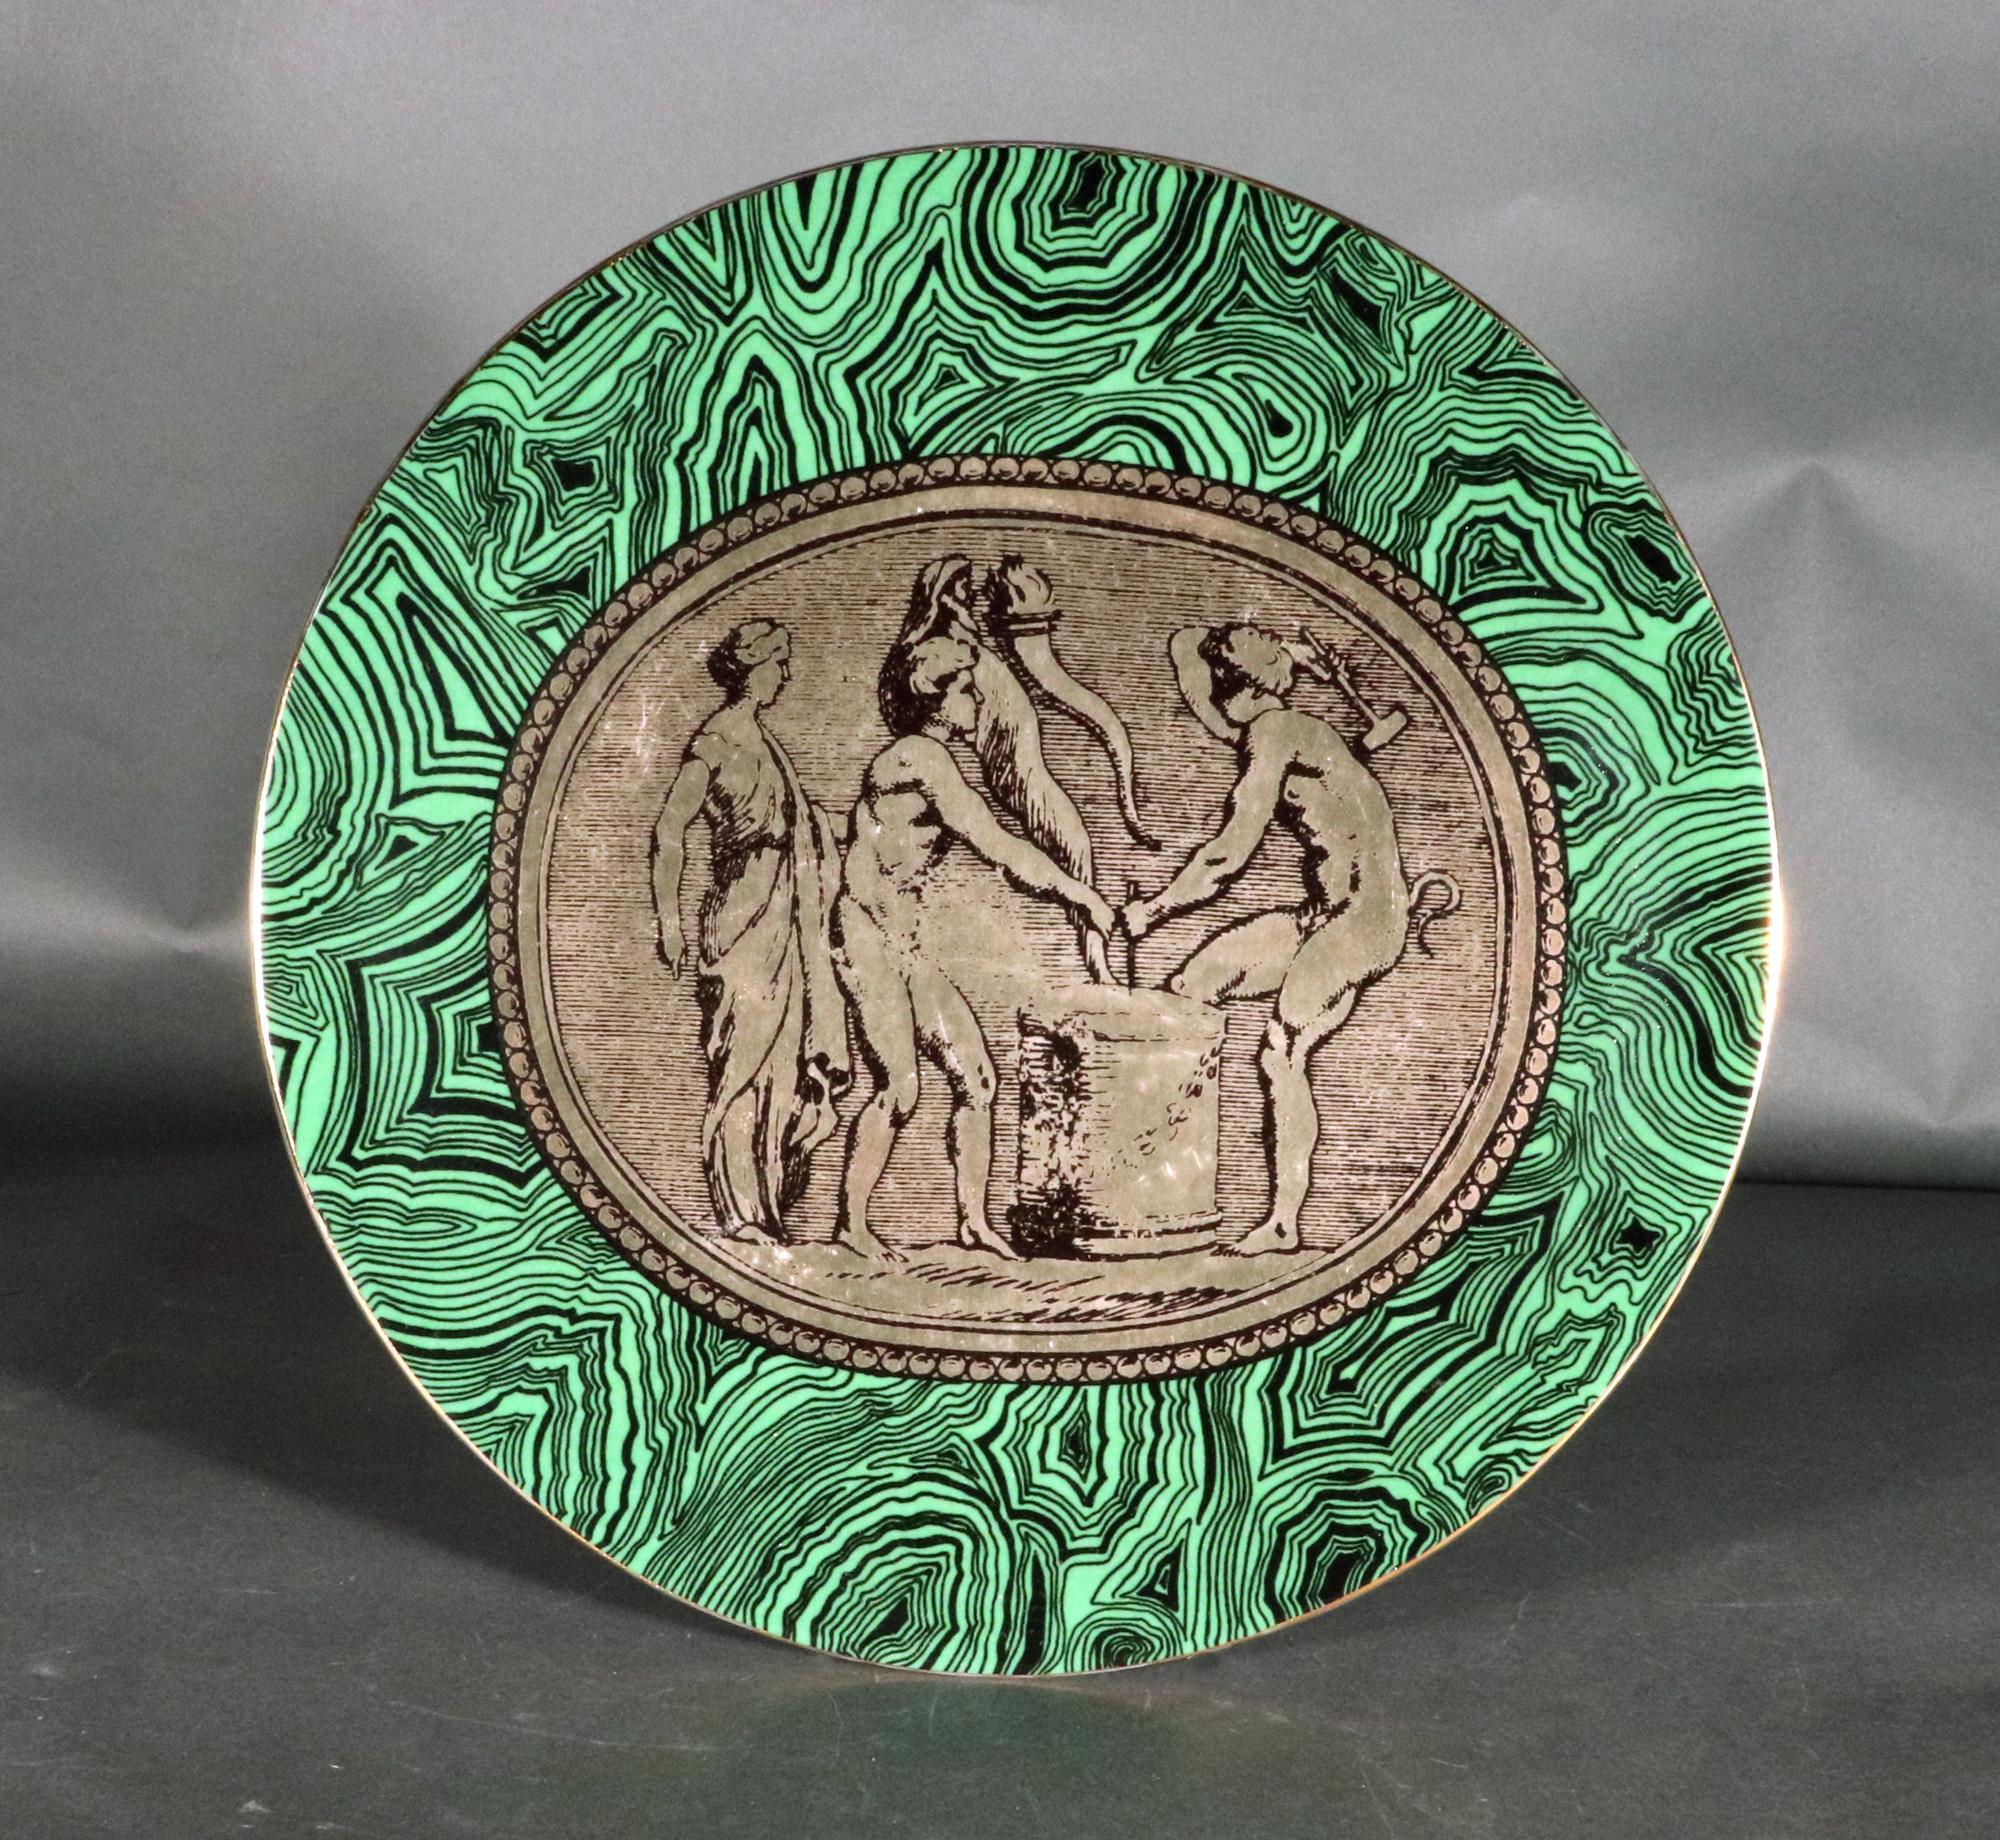 Piero Fornasetti Porcelain Green Malachite Cammei Plate,
Cammei or Cameo,
Circa 1950s-60s
From a Set of Five- sold separately.

The Piero Fornasetti porcelain plate, named Cammei on the reverse, meaning Cameo, has a ground of green malachite with a